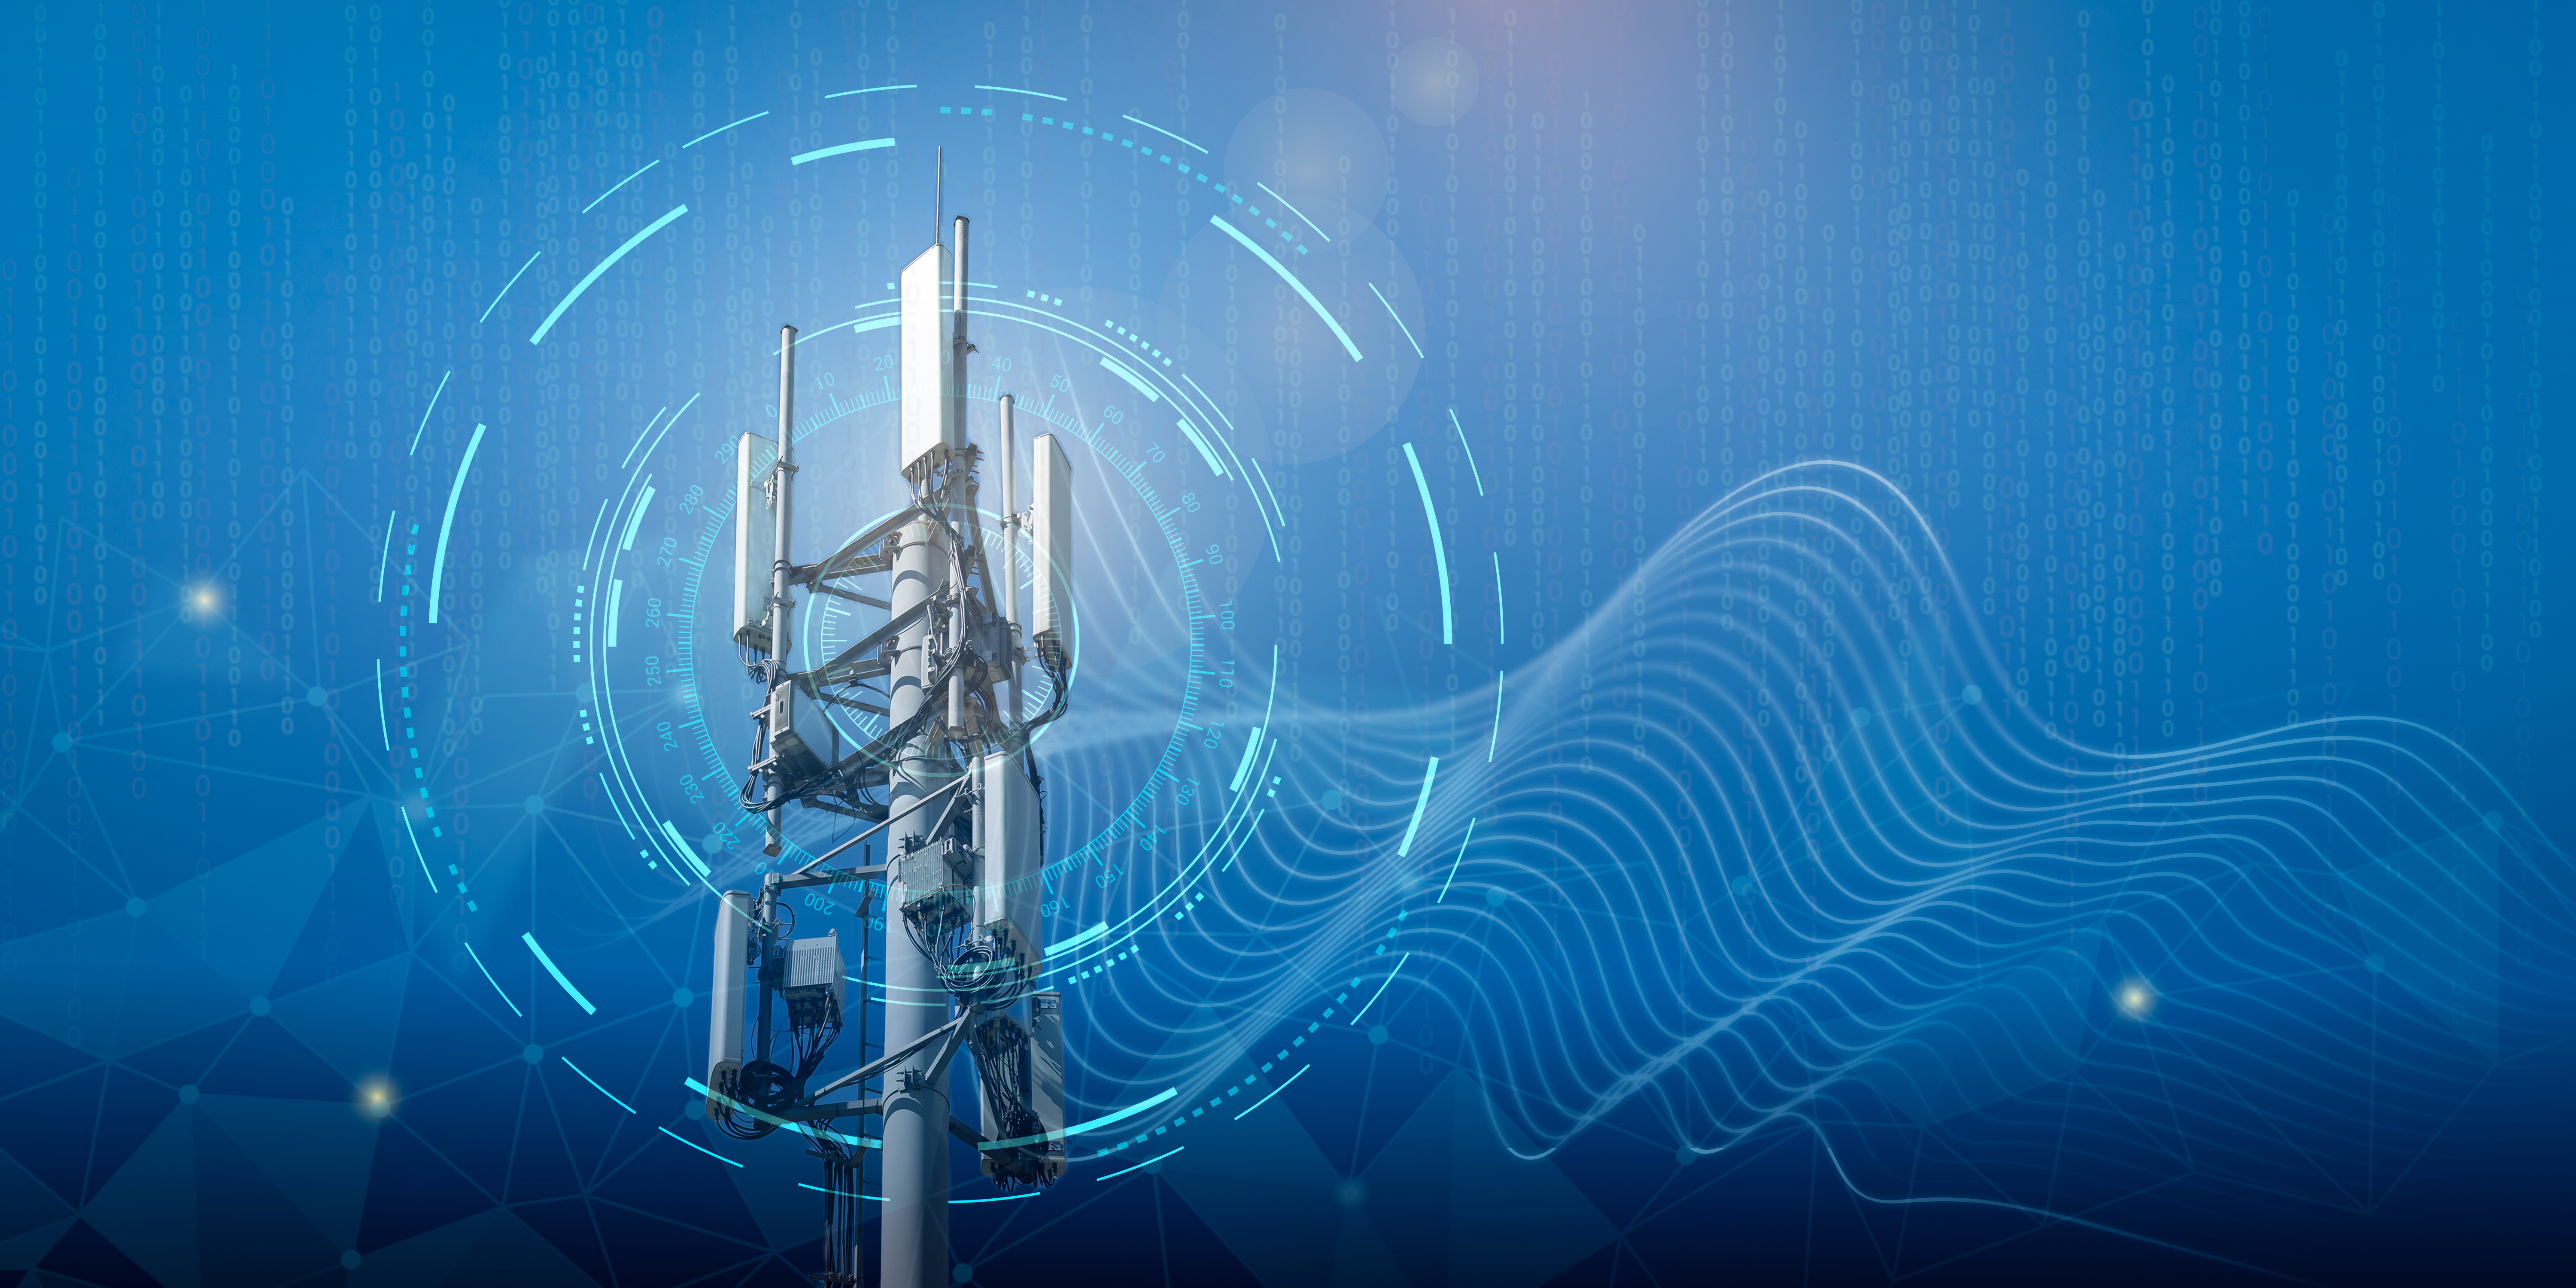 Wired Access Backhaul vs. Wireless Access Backhaul: What's the Difference?